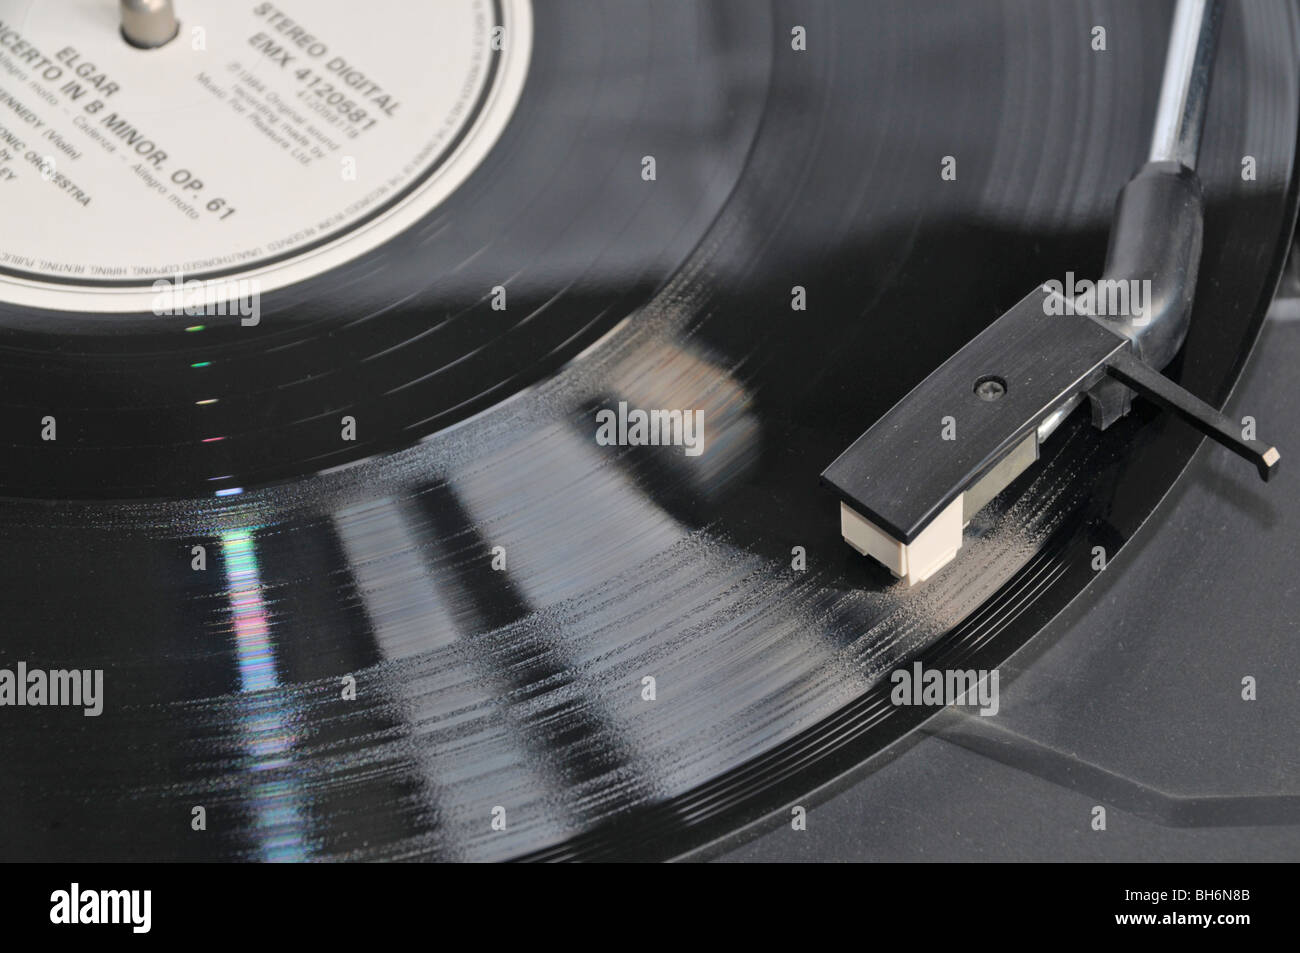 Looking down on an LP being played on a turntable Stock Photo